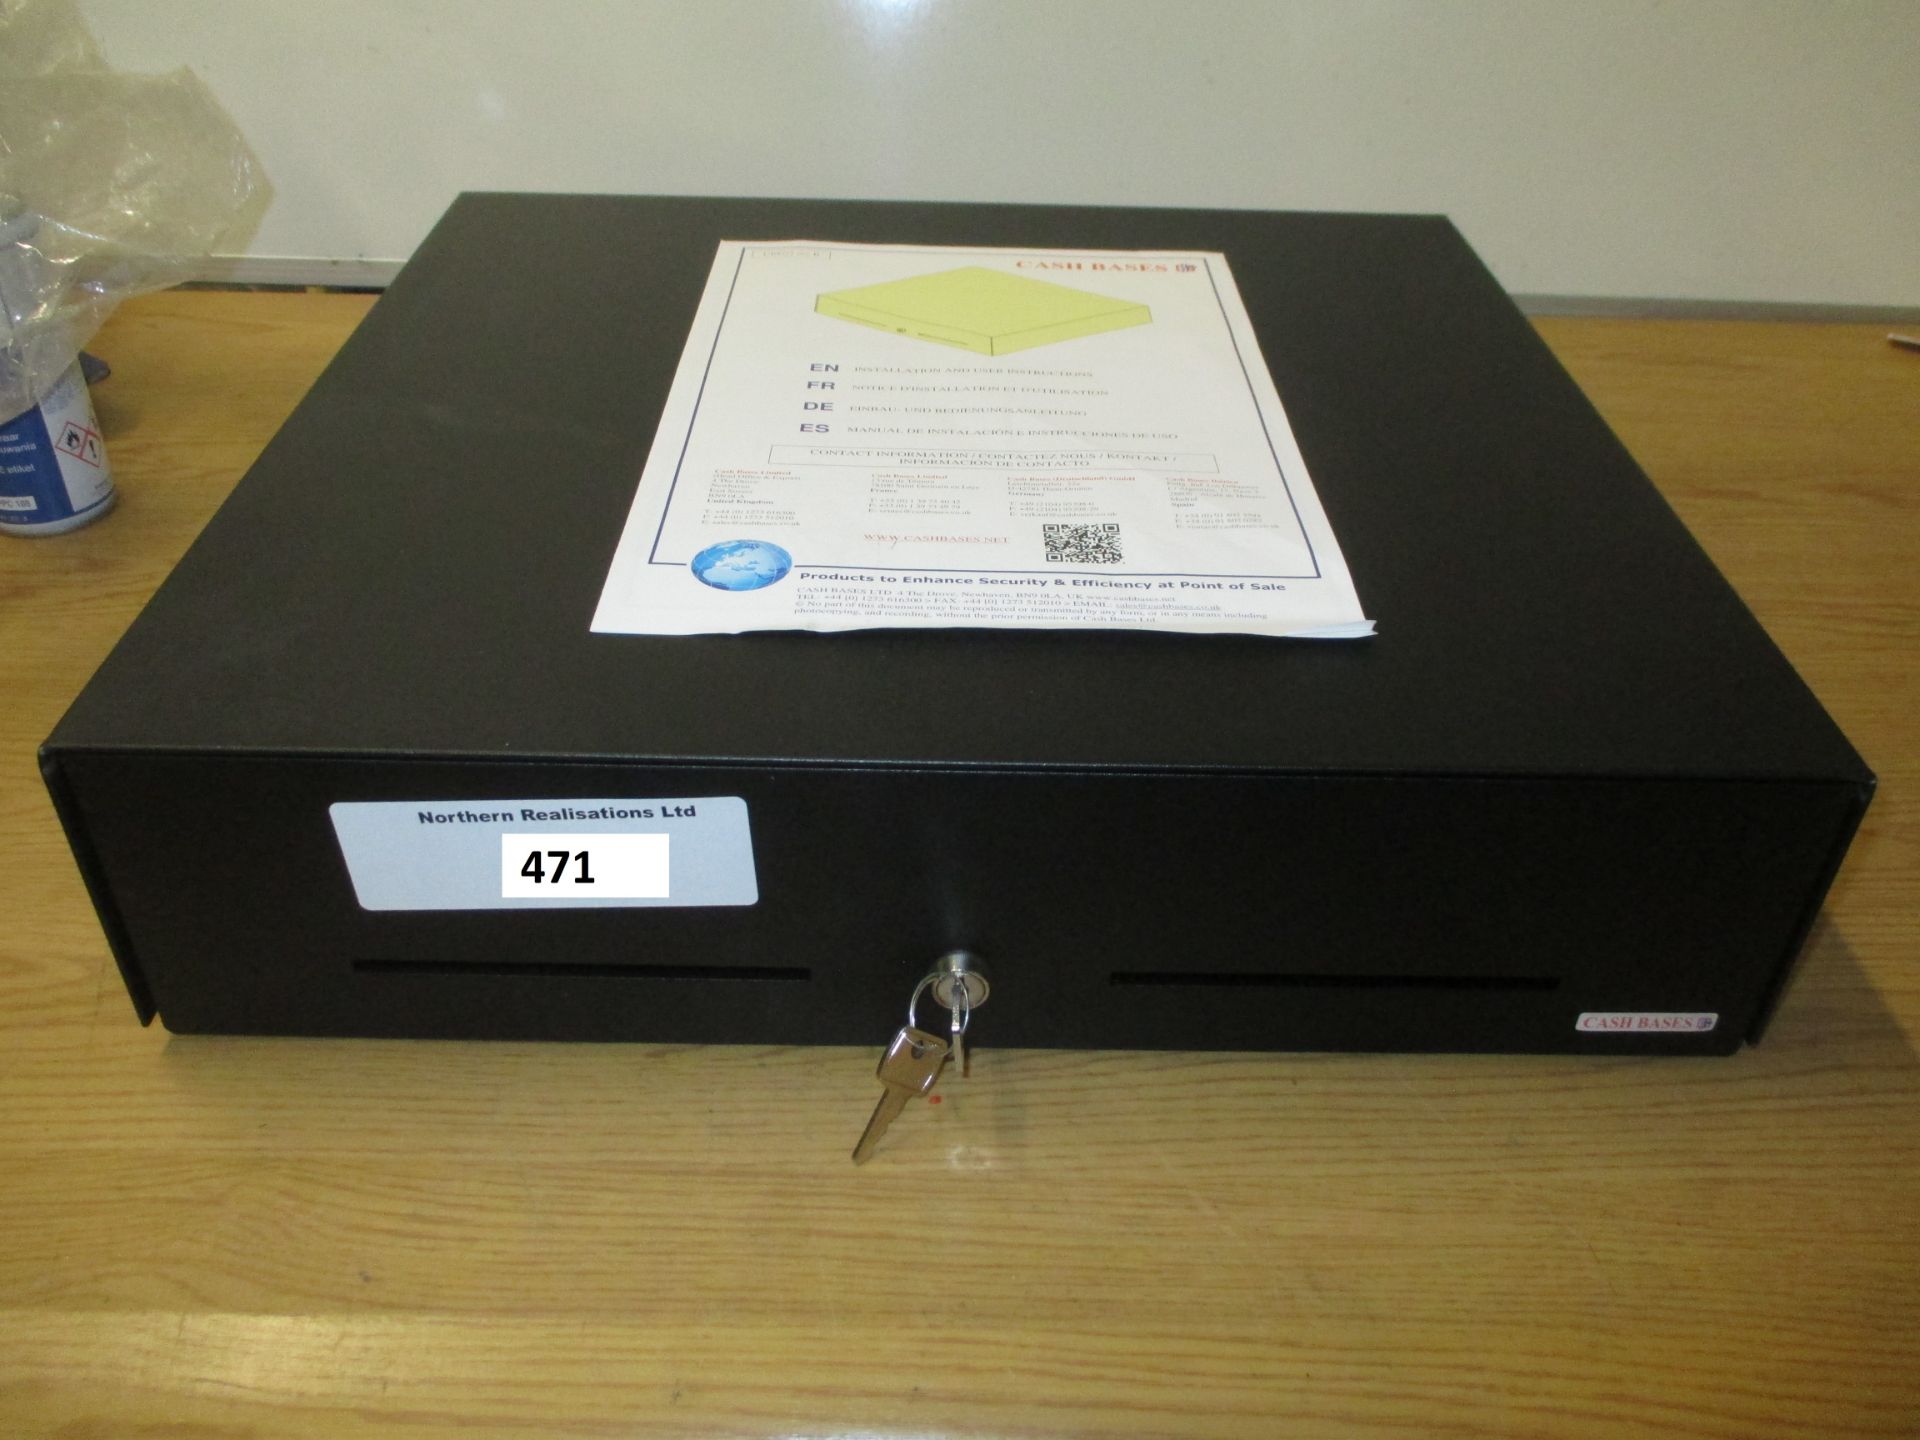 POINT OF SALE EQUIPMENT. NEW & UNUSED CASH BASES GOOD QUALITY CASH DRAWER WITH KEY, SEE PHOTOS.